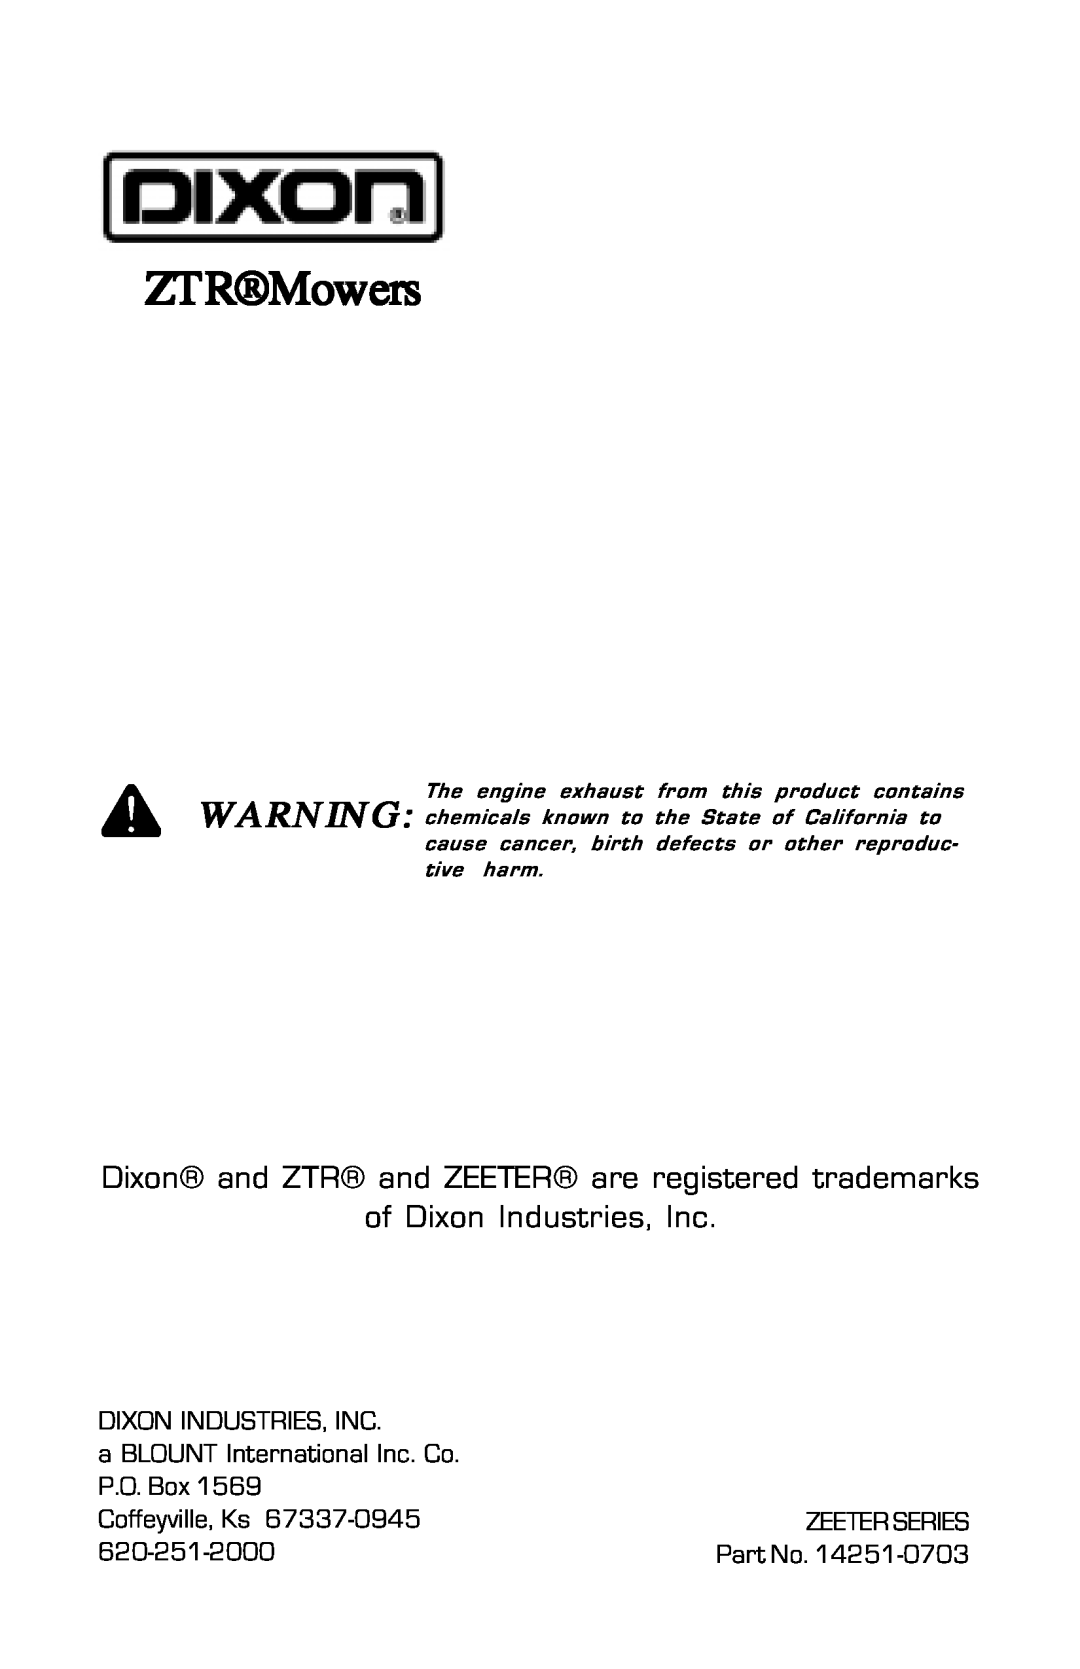 Dixon 2004 manual ZTRMowers, Dixon and ZTR and ZEETER are registered trademarks, of Dixon Industries, Inc 